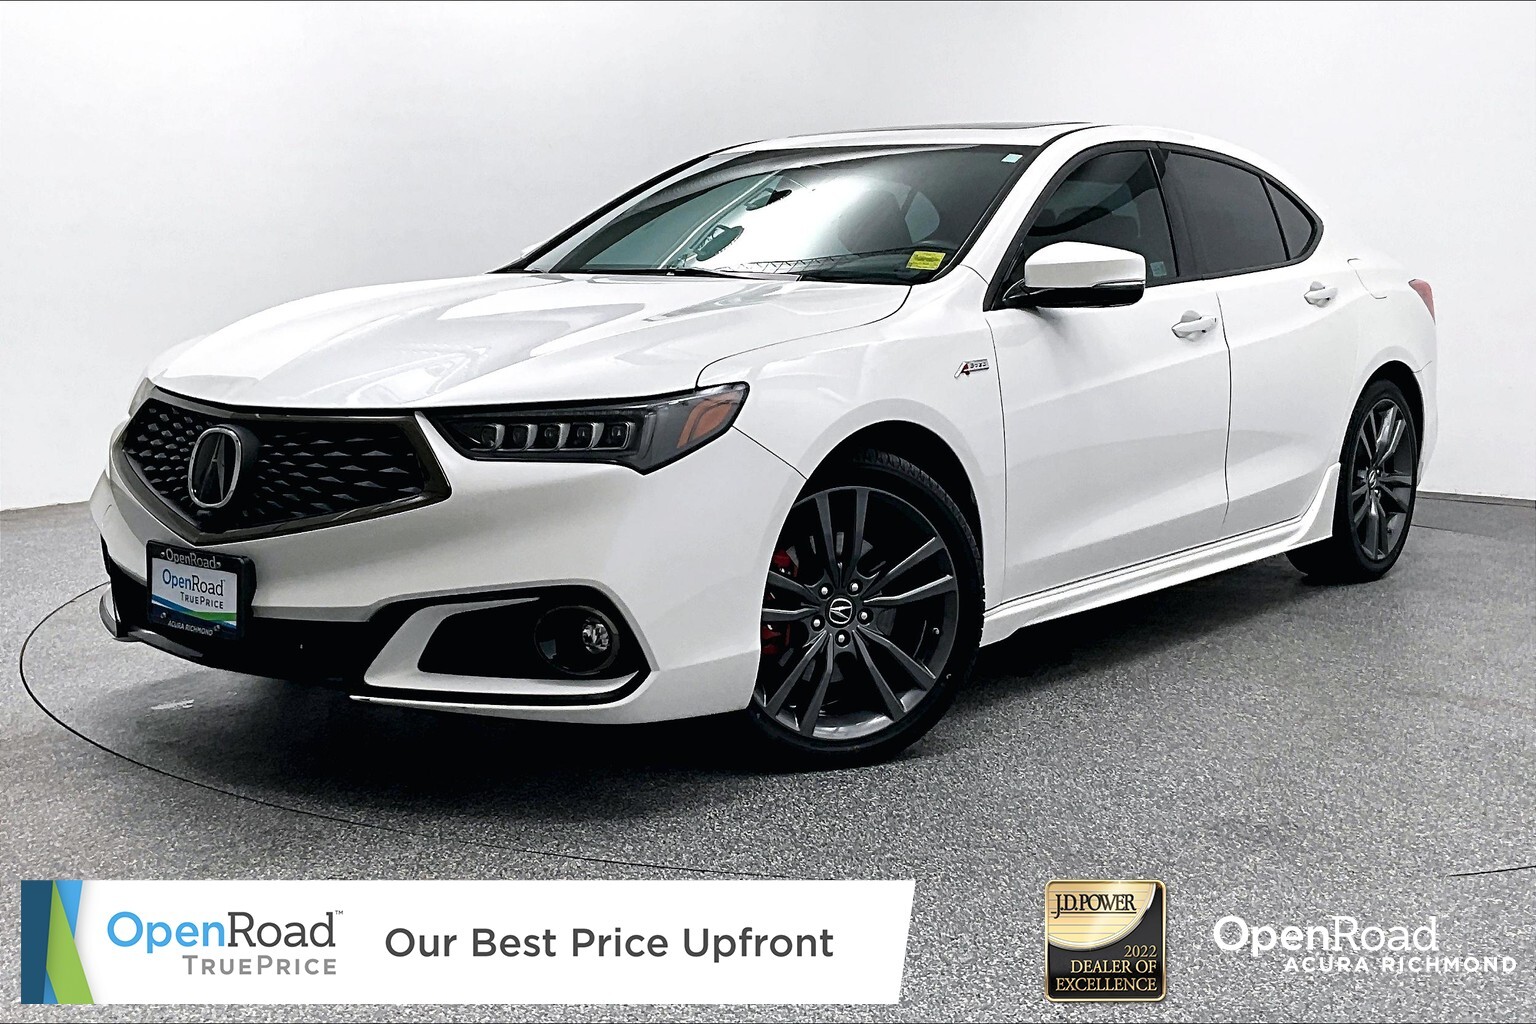 2020 Acura TLX Elite A-Spec | Certified Pre-Owned | One Owner